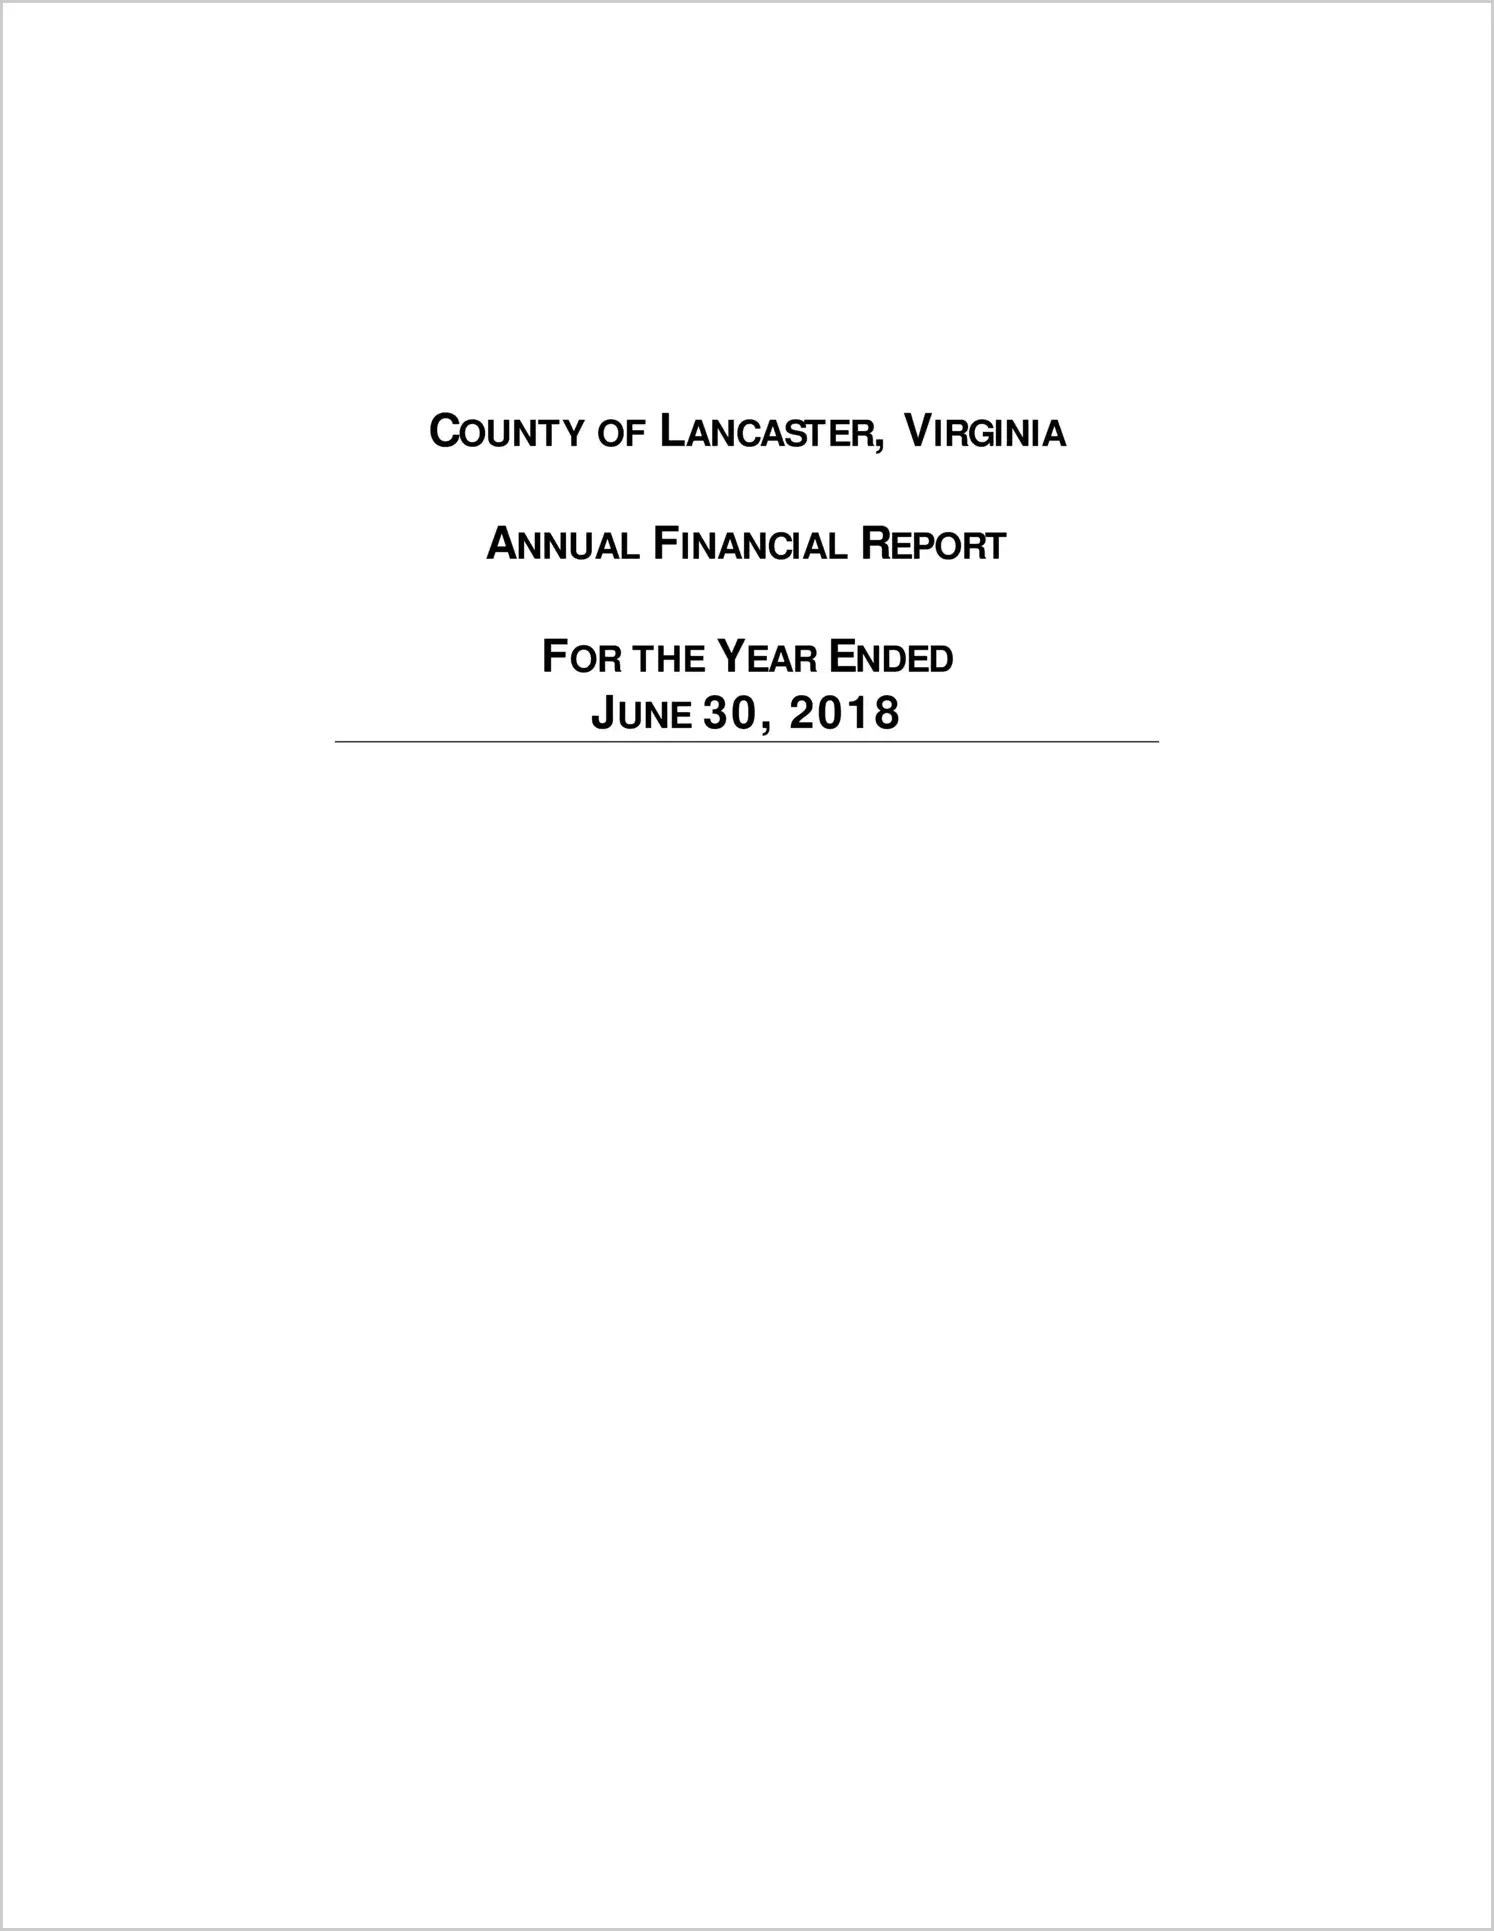 2018 Annual Financial Report for County of Lancaster